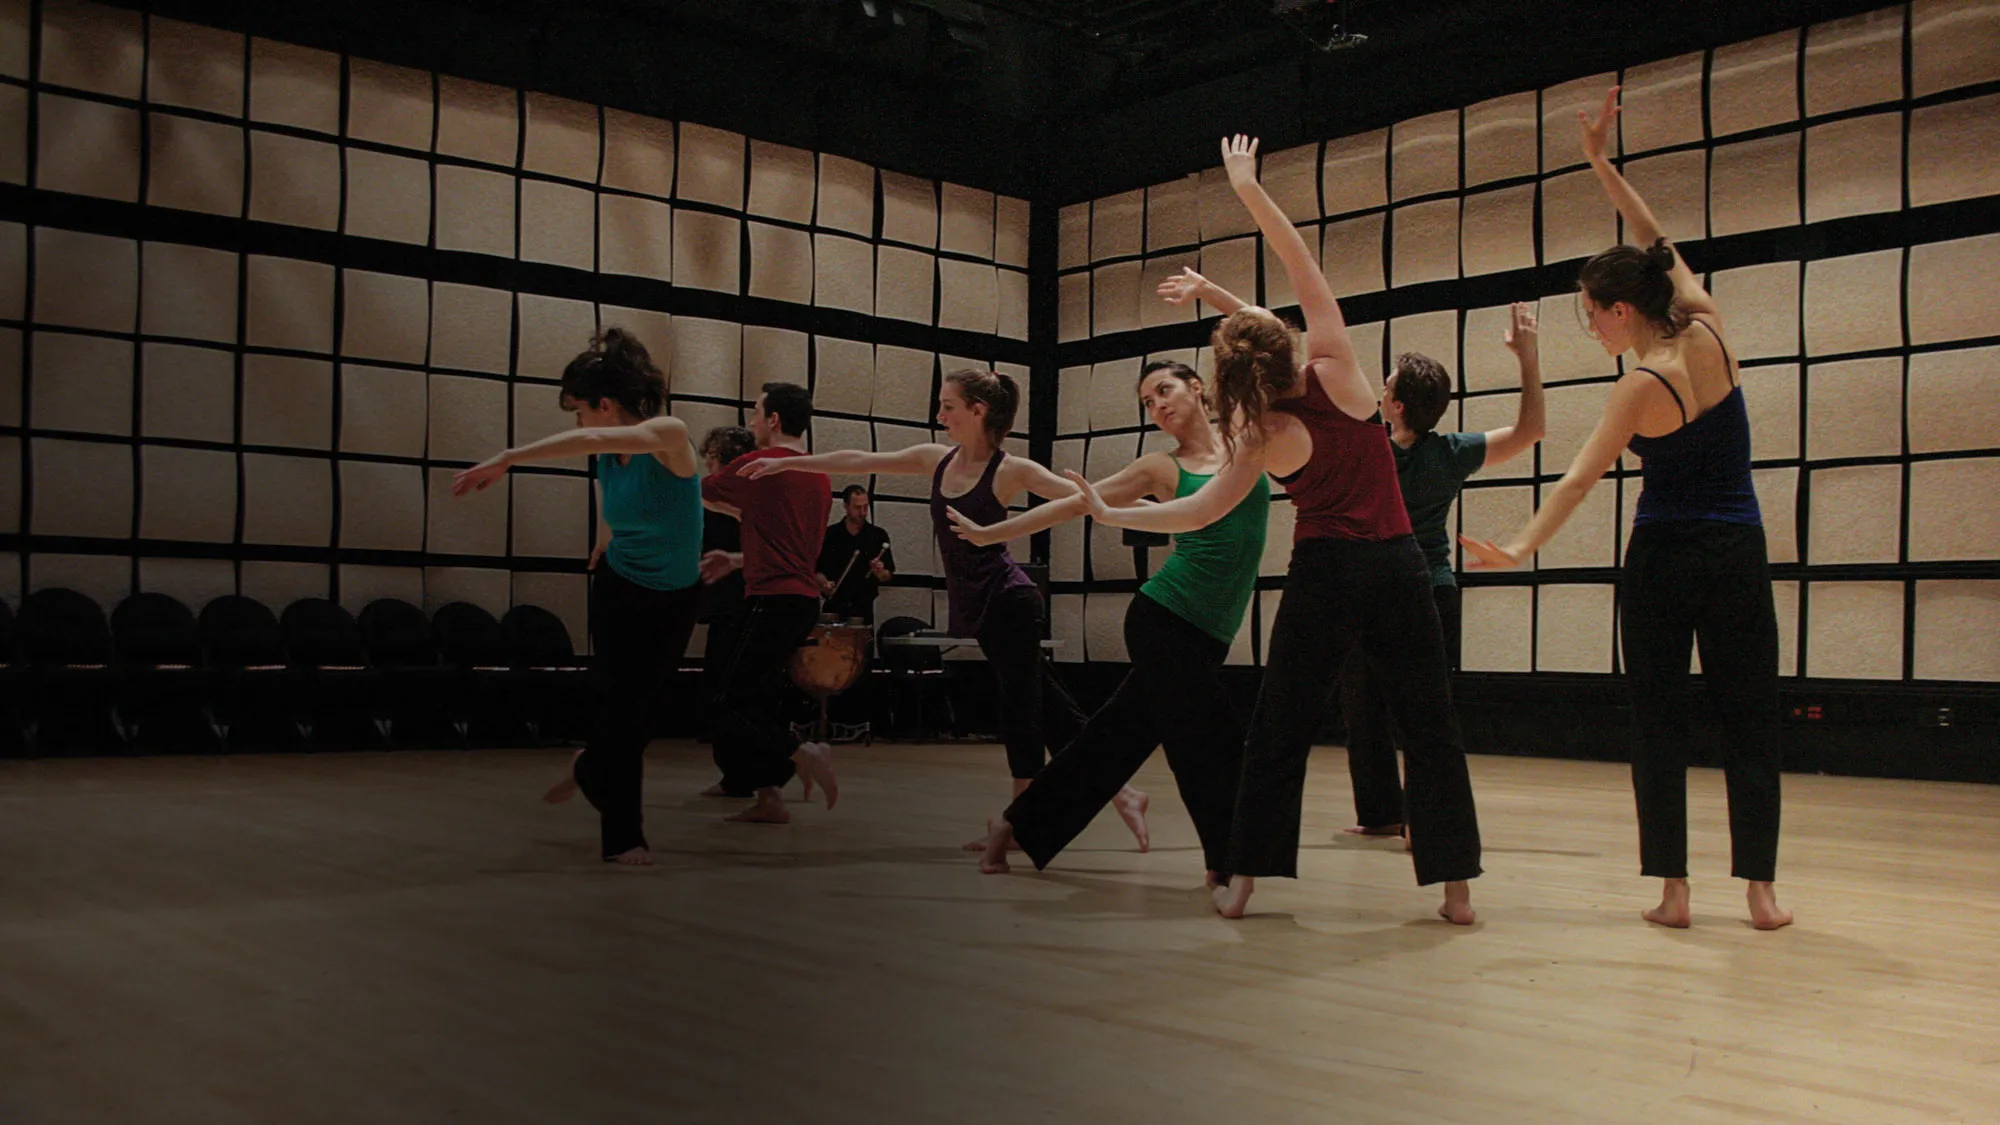 Eight dancers wearing jewel toned tops with black bottoms, moving with arms outstreched in a room with tan acoustic tiles on the walls. 